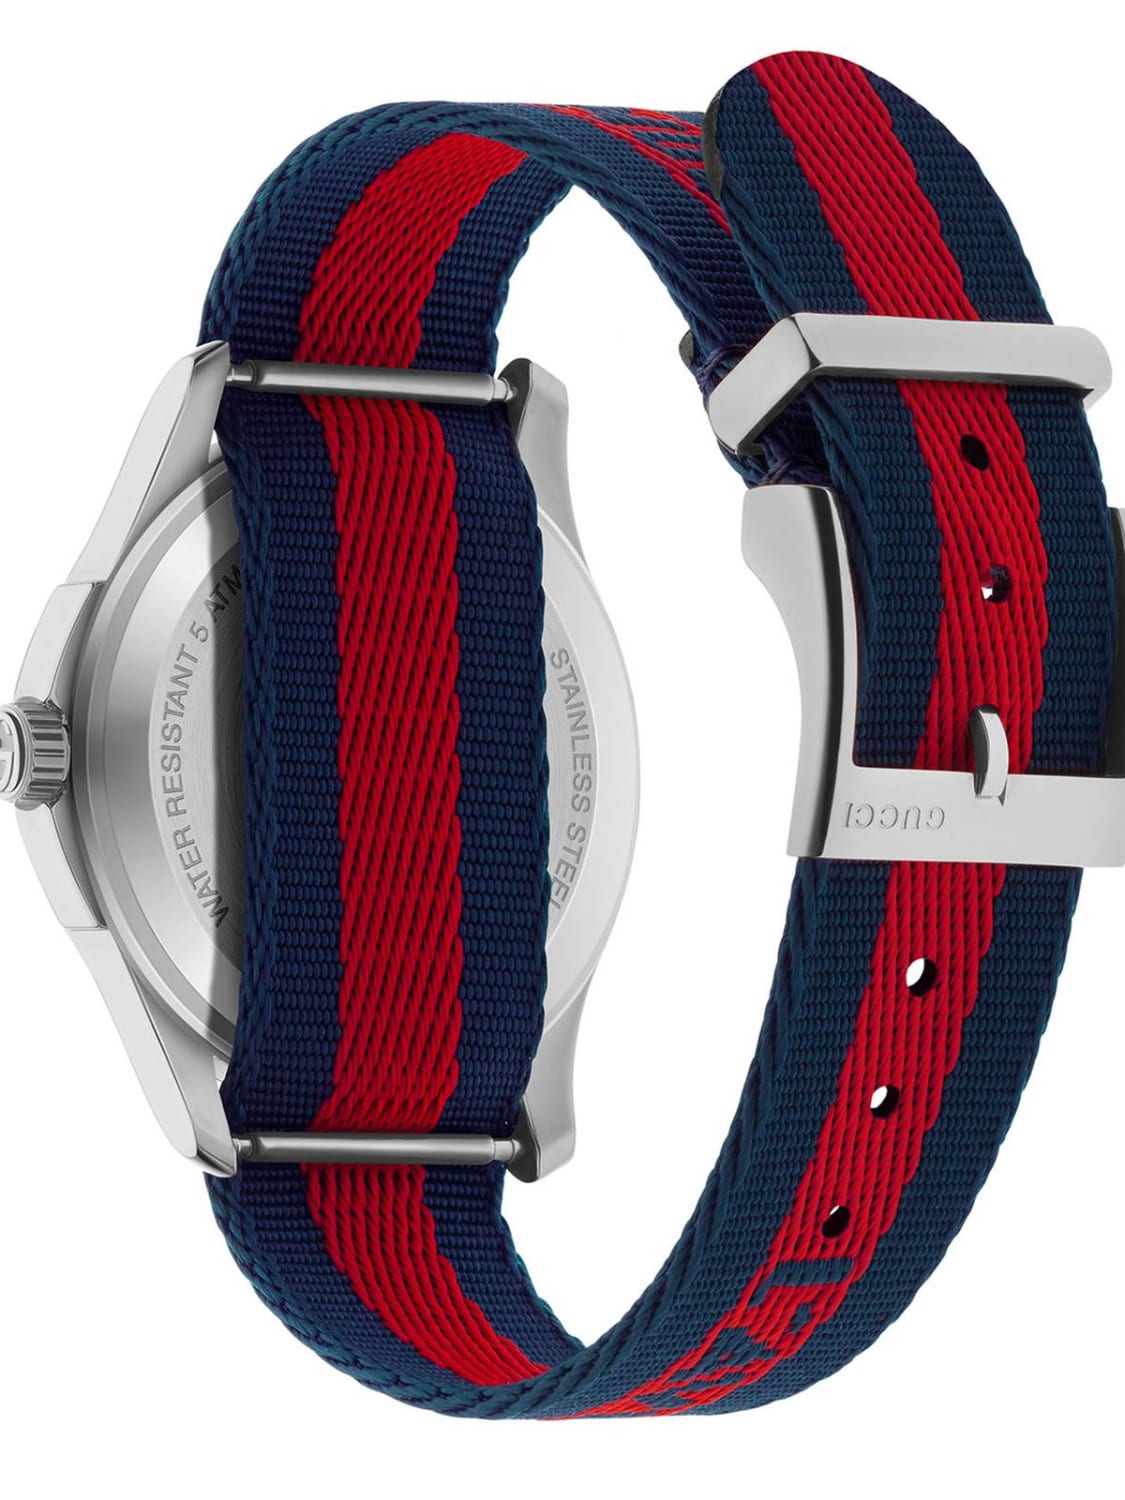 Watch Gucci: Le Marché des Merveilles watch case 38mm with Web Snake Pattern red 2